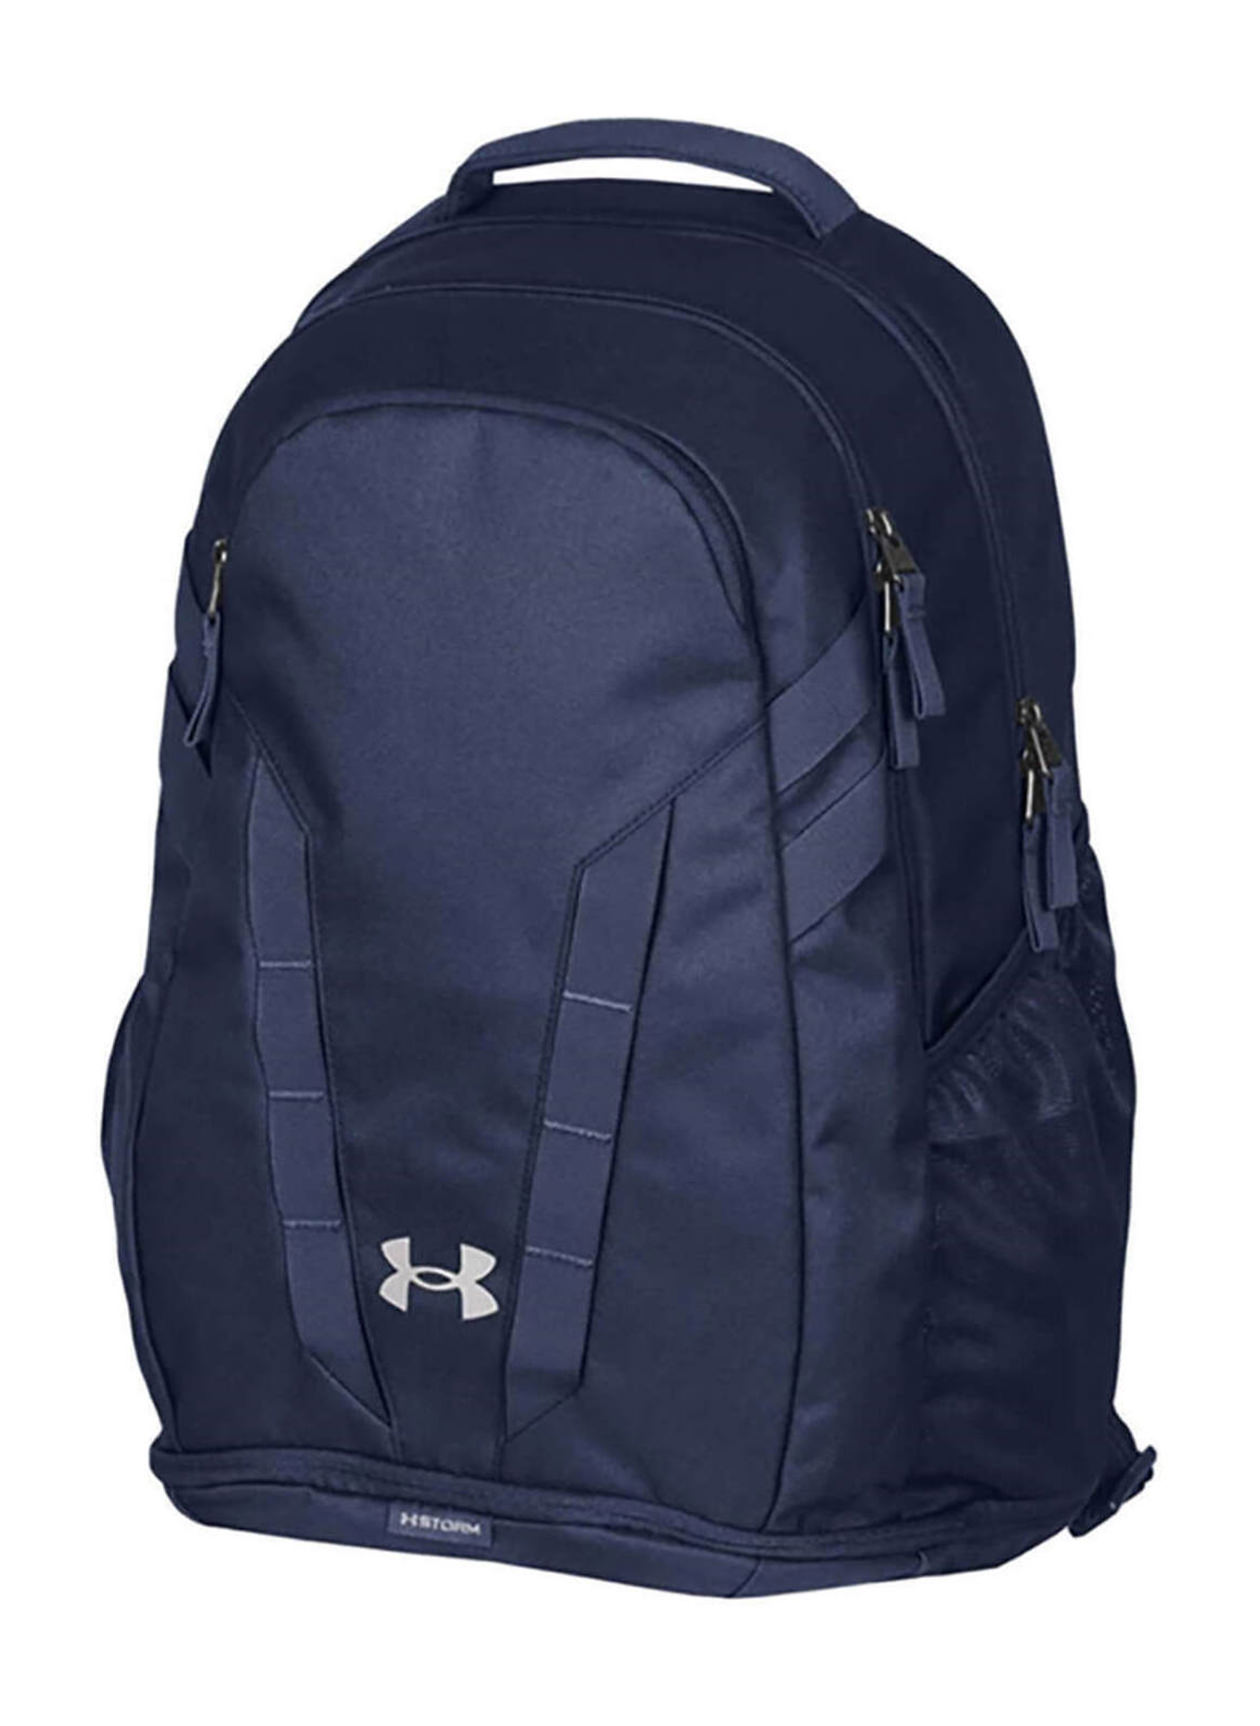 Under Armour Midnight Navy Hustle 5.0 Backpack